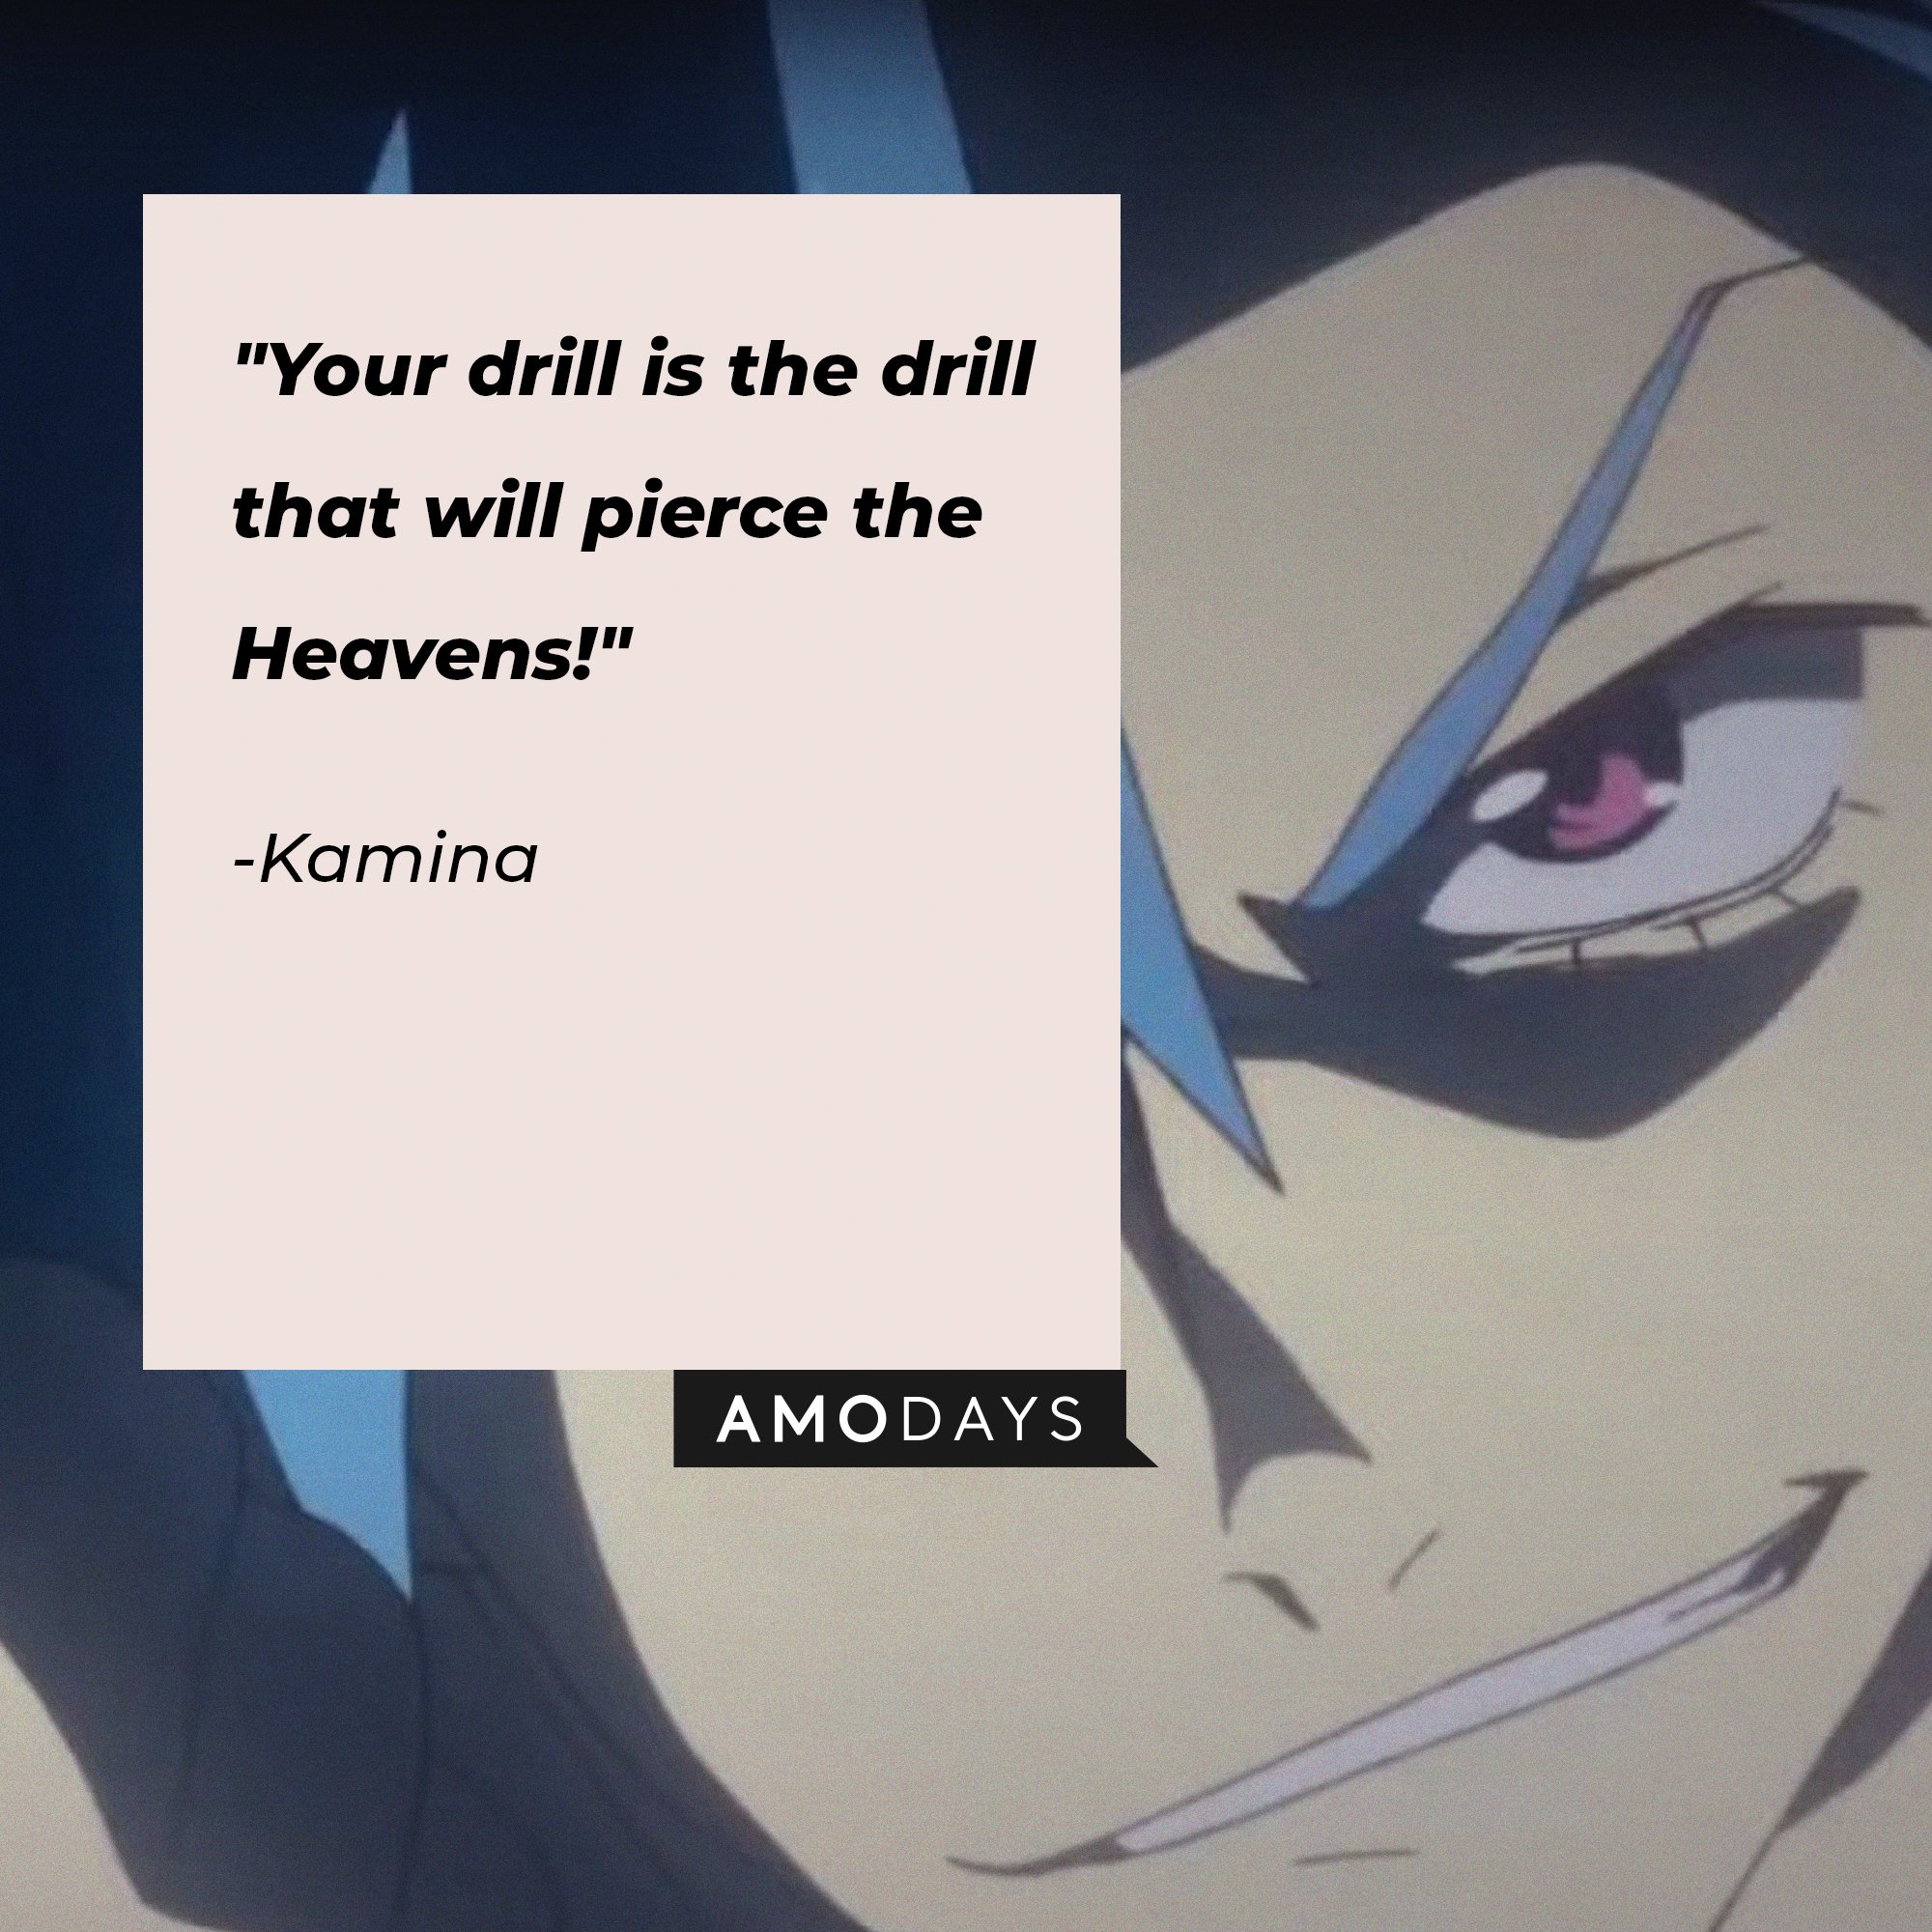 Kamina's quote: "Your drill is the drill that will pierce the Heavens!" | Image: AmoDays    